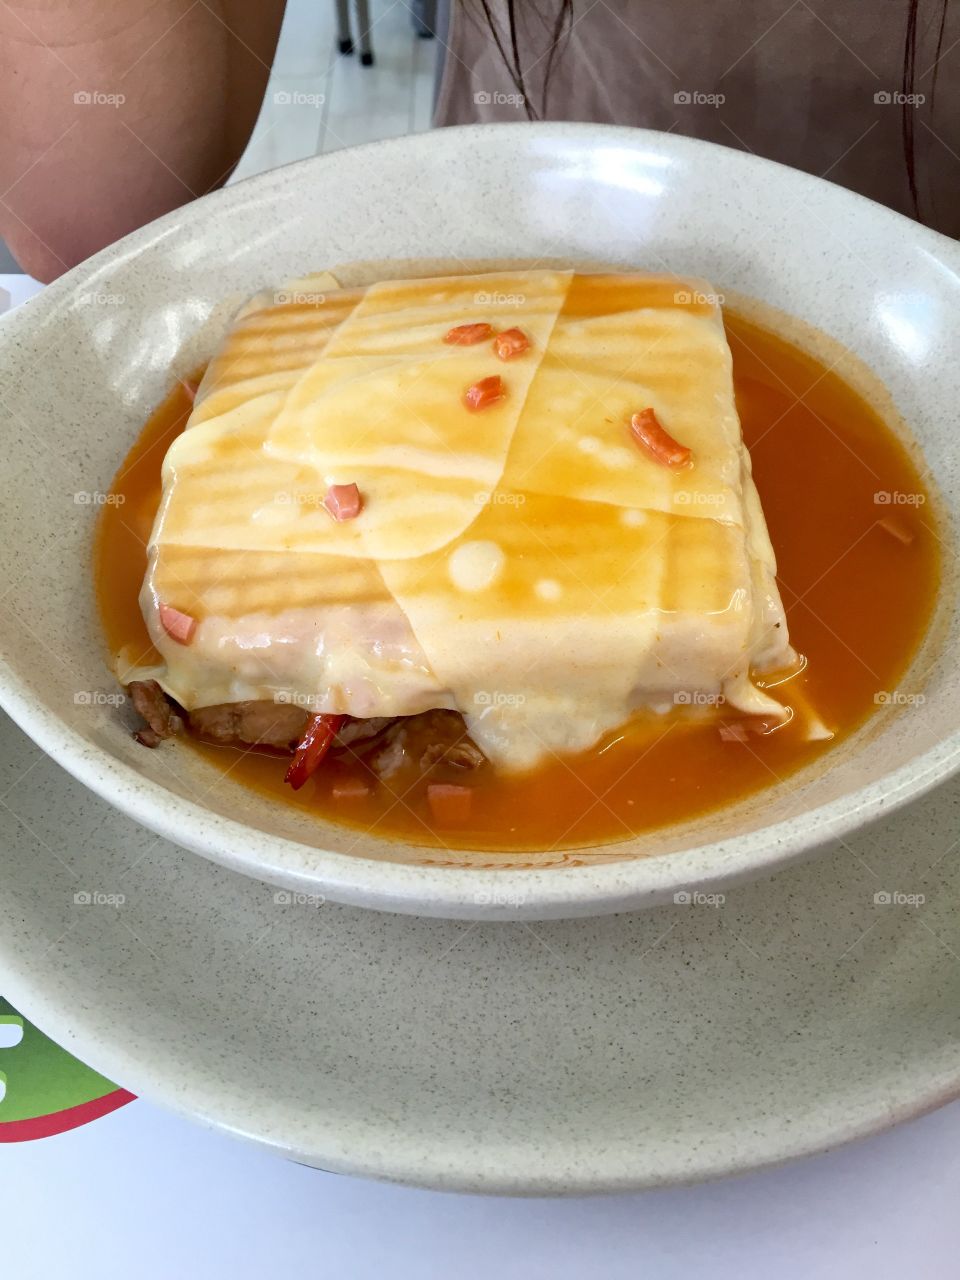 Typical dish from Portugal. Name: Francesinha 🙏